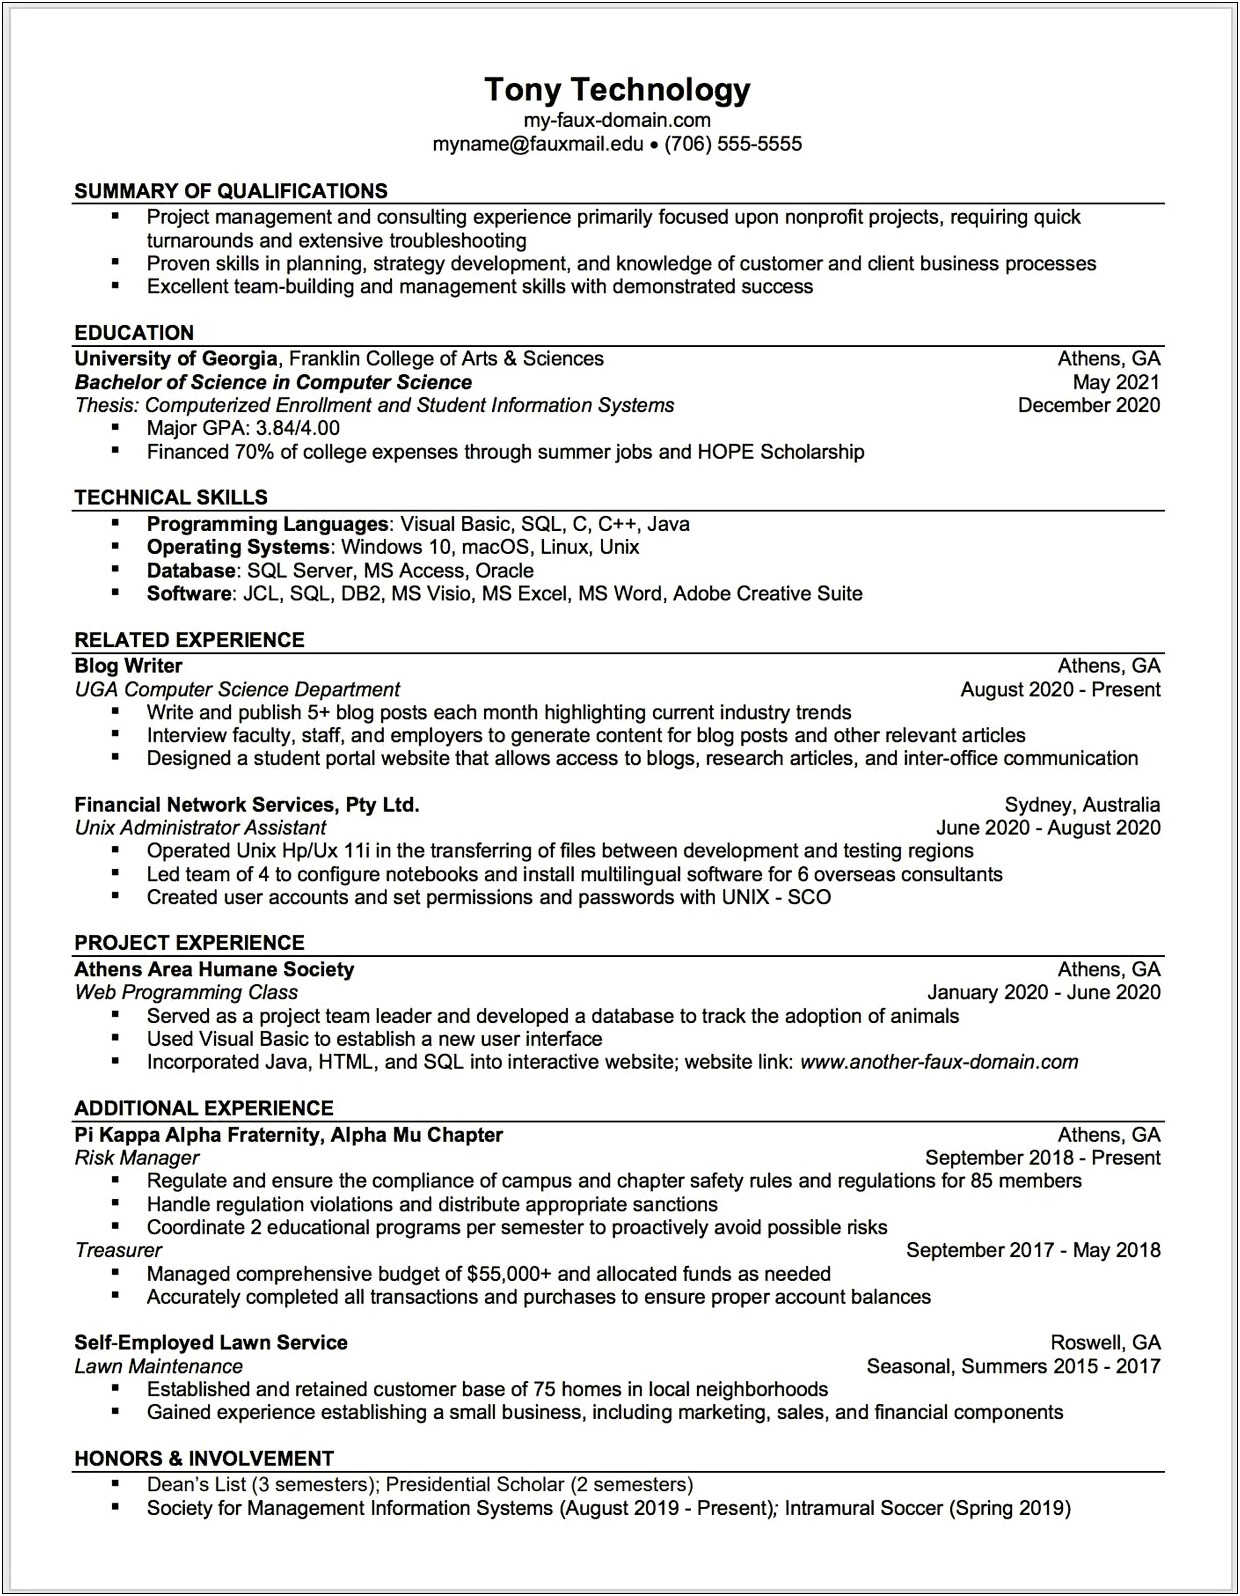 Microsoft Office Suite 2019 Resume Experience